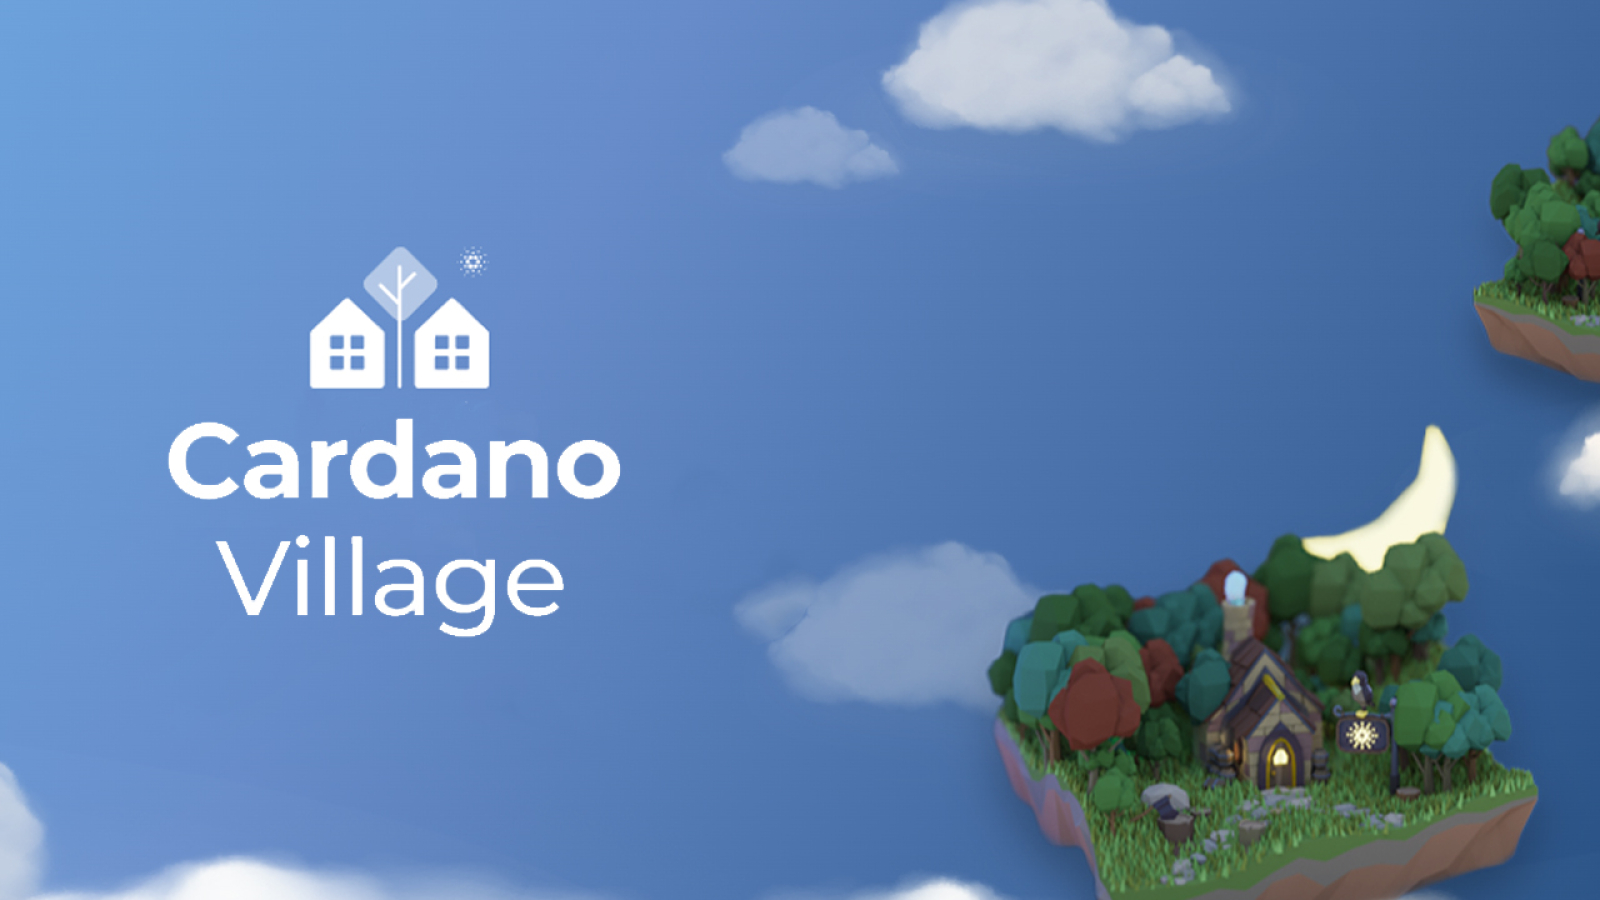 Cardano Village, the Metaverse Proving Its Worth Through Art and IT Technology